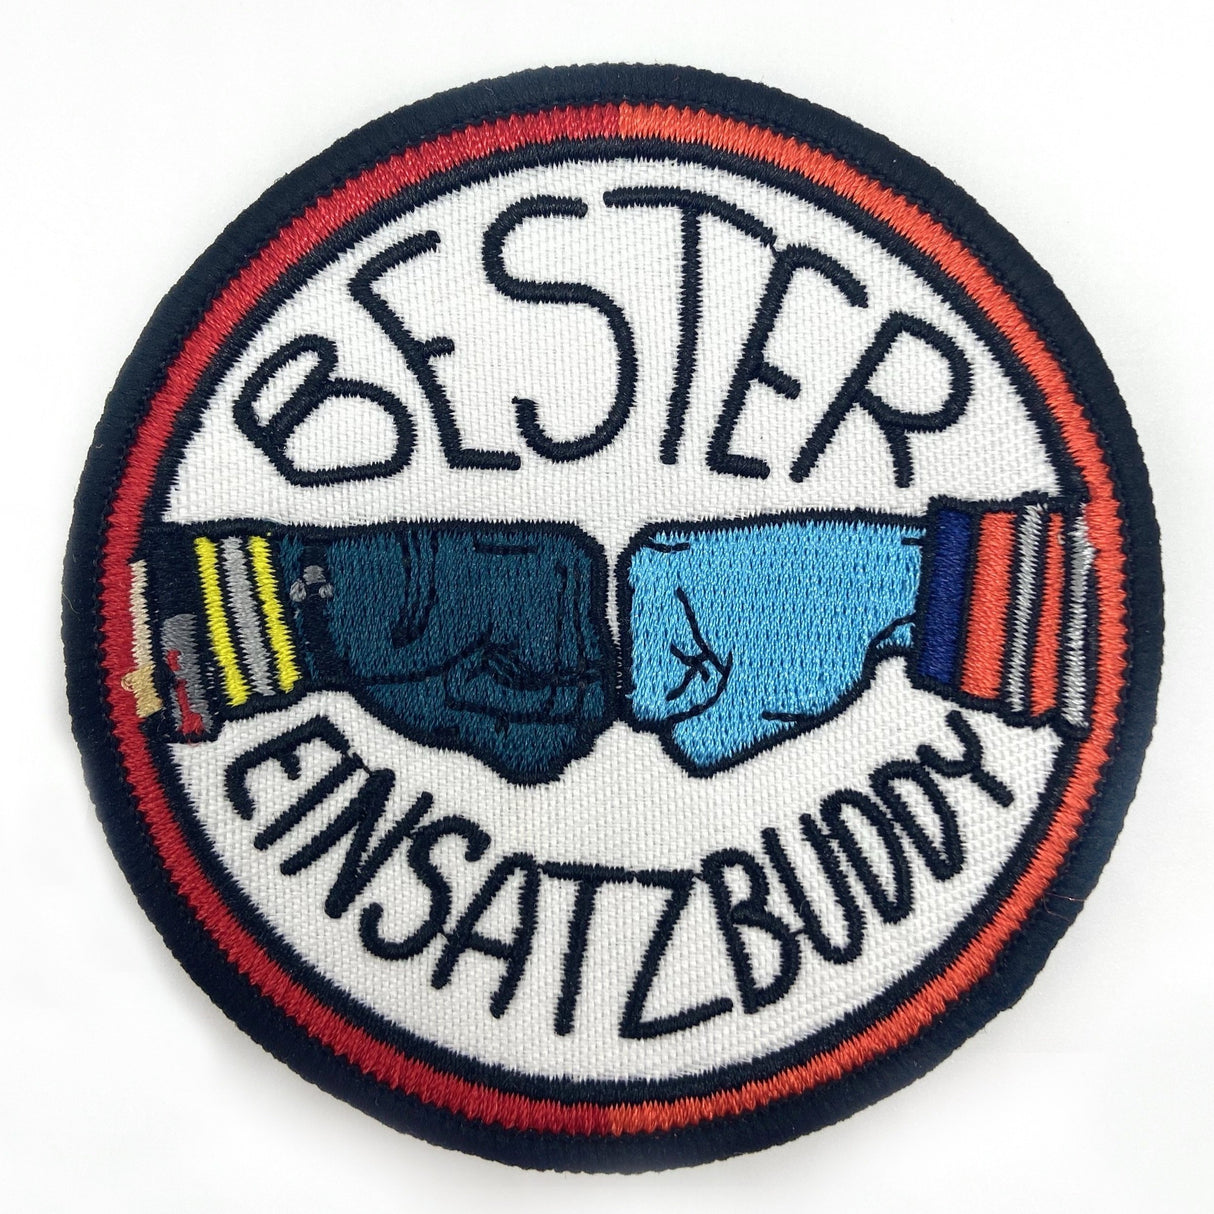 Fire Department/Rescue Best Buddy Textile Patch